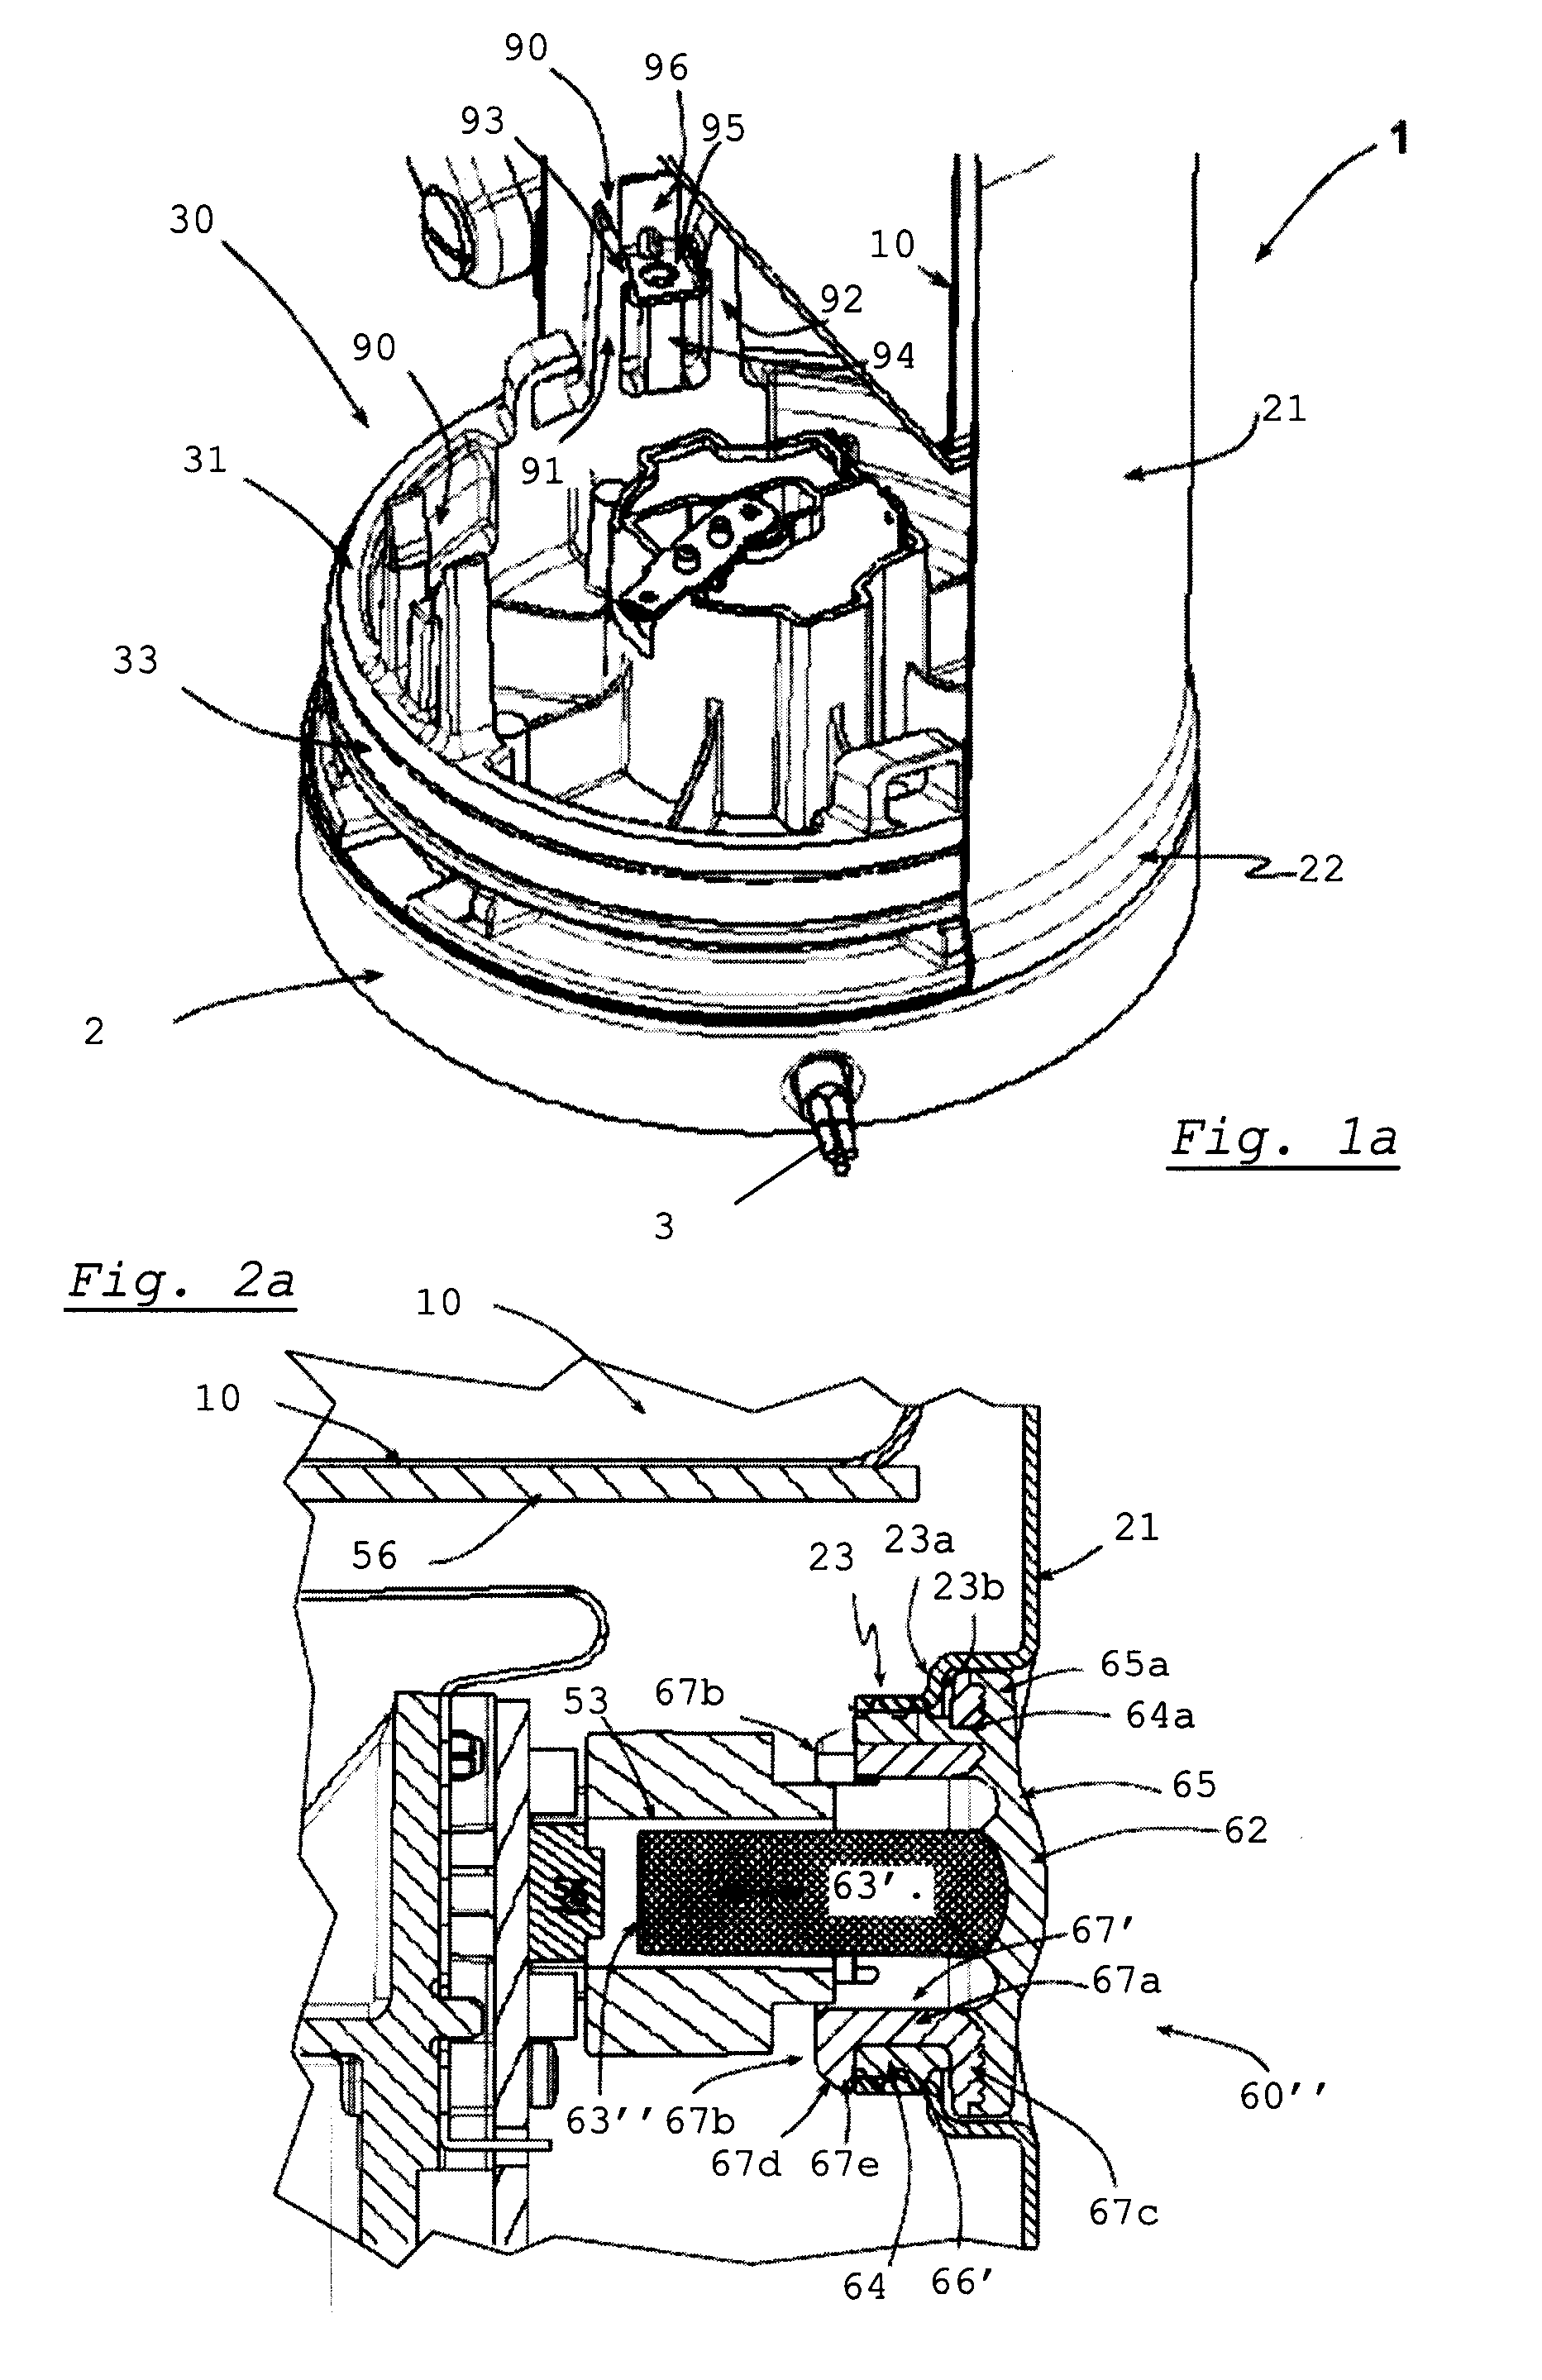 Appliance for conditioning a milk-based liquid